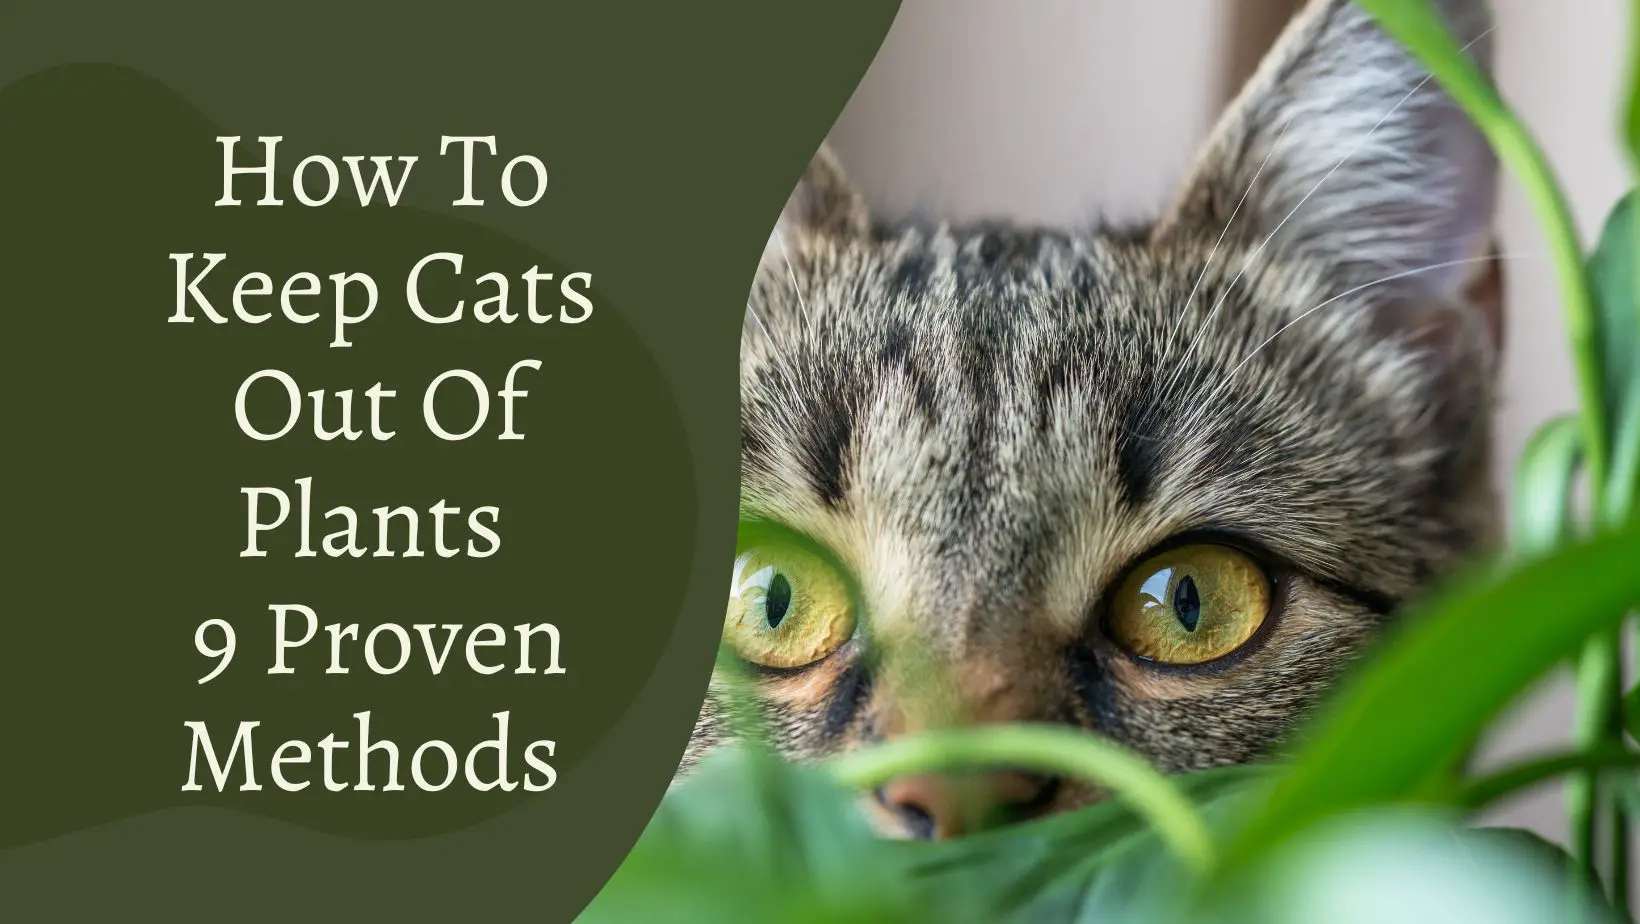 How To Keep Cats Out Of Plants